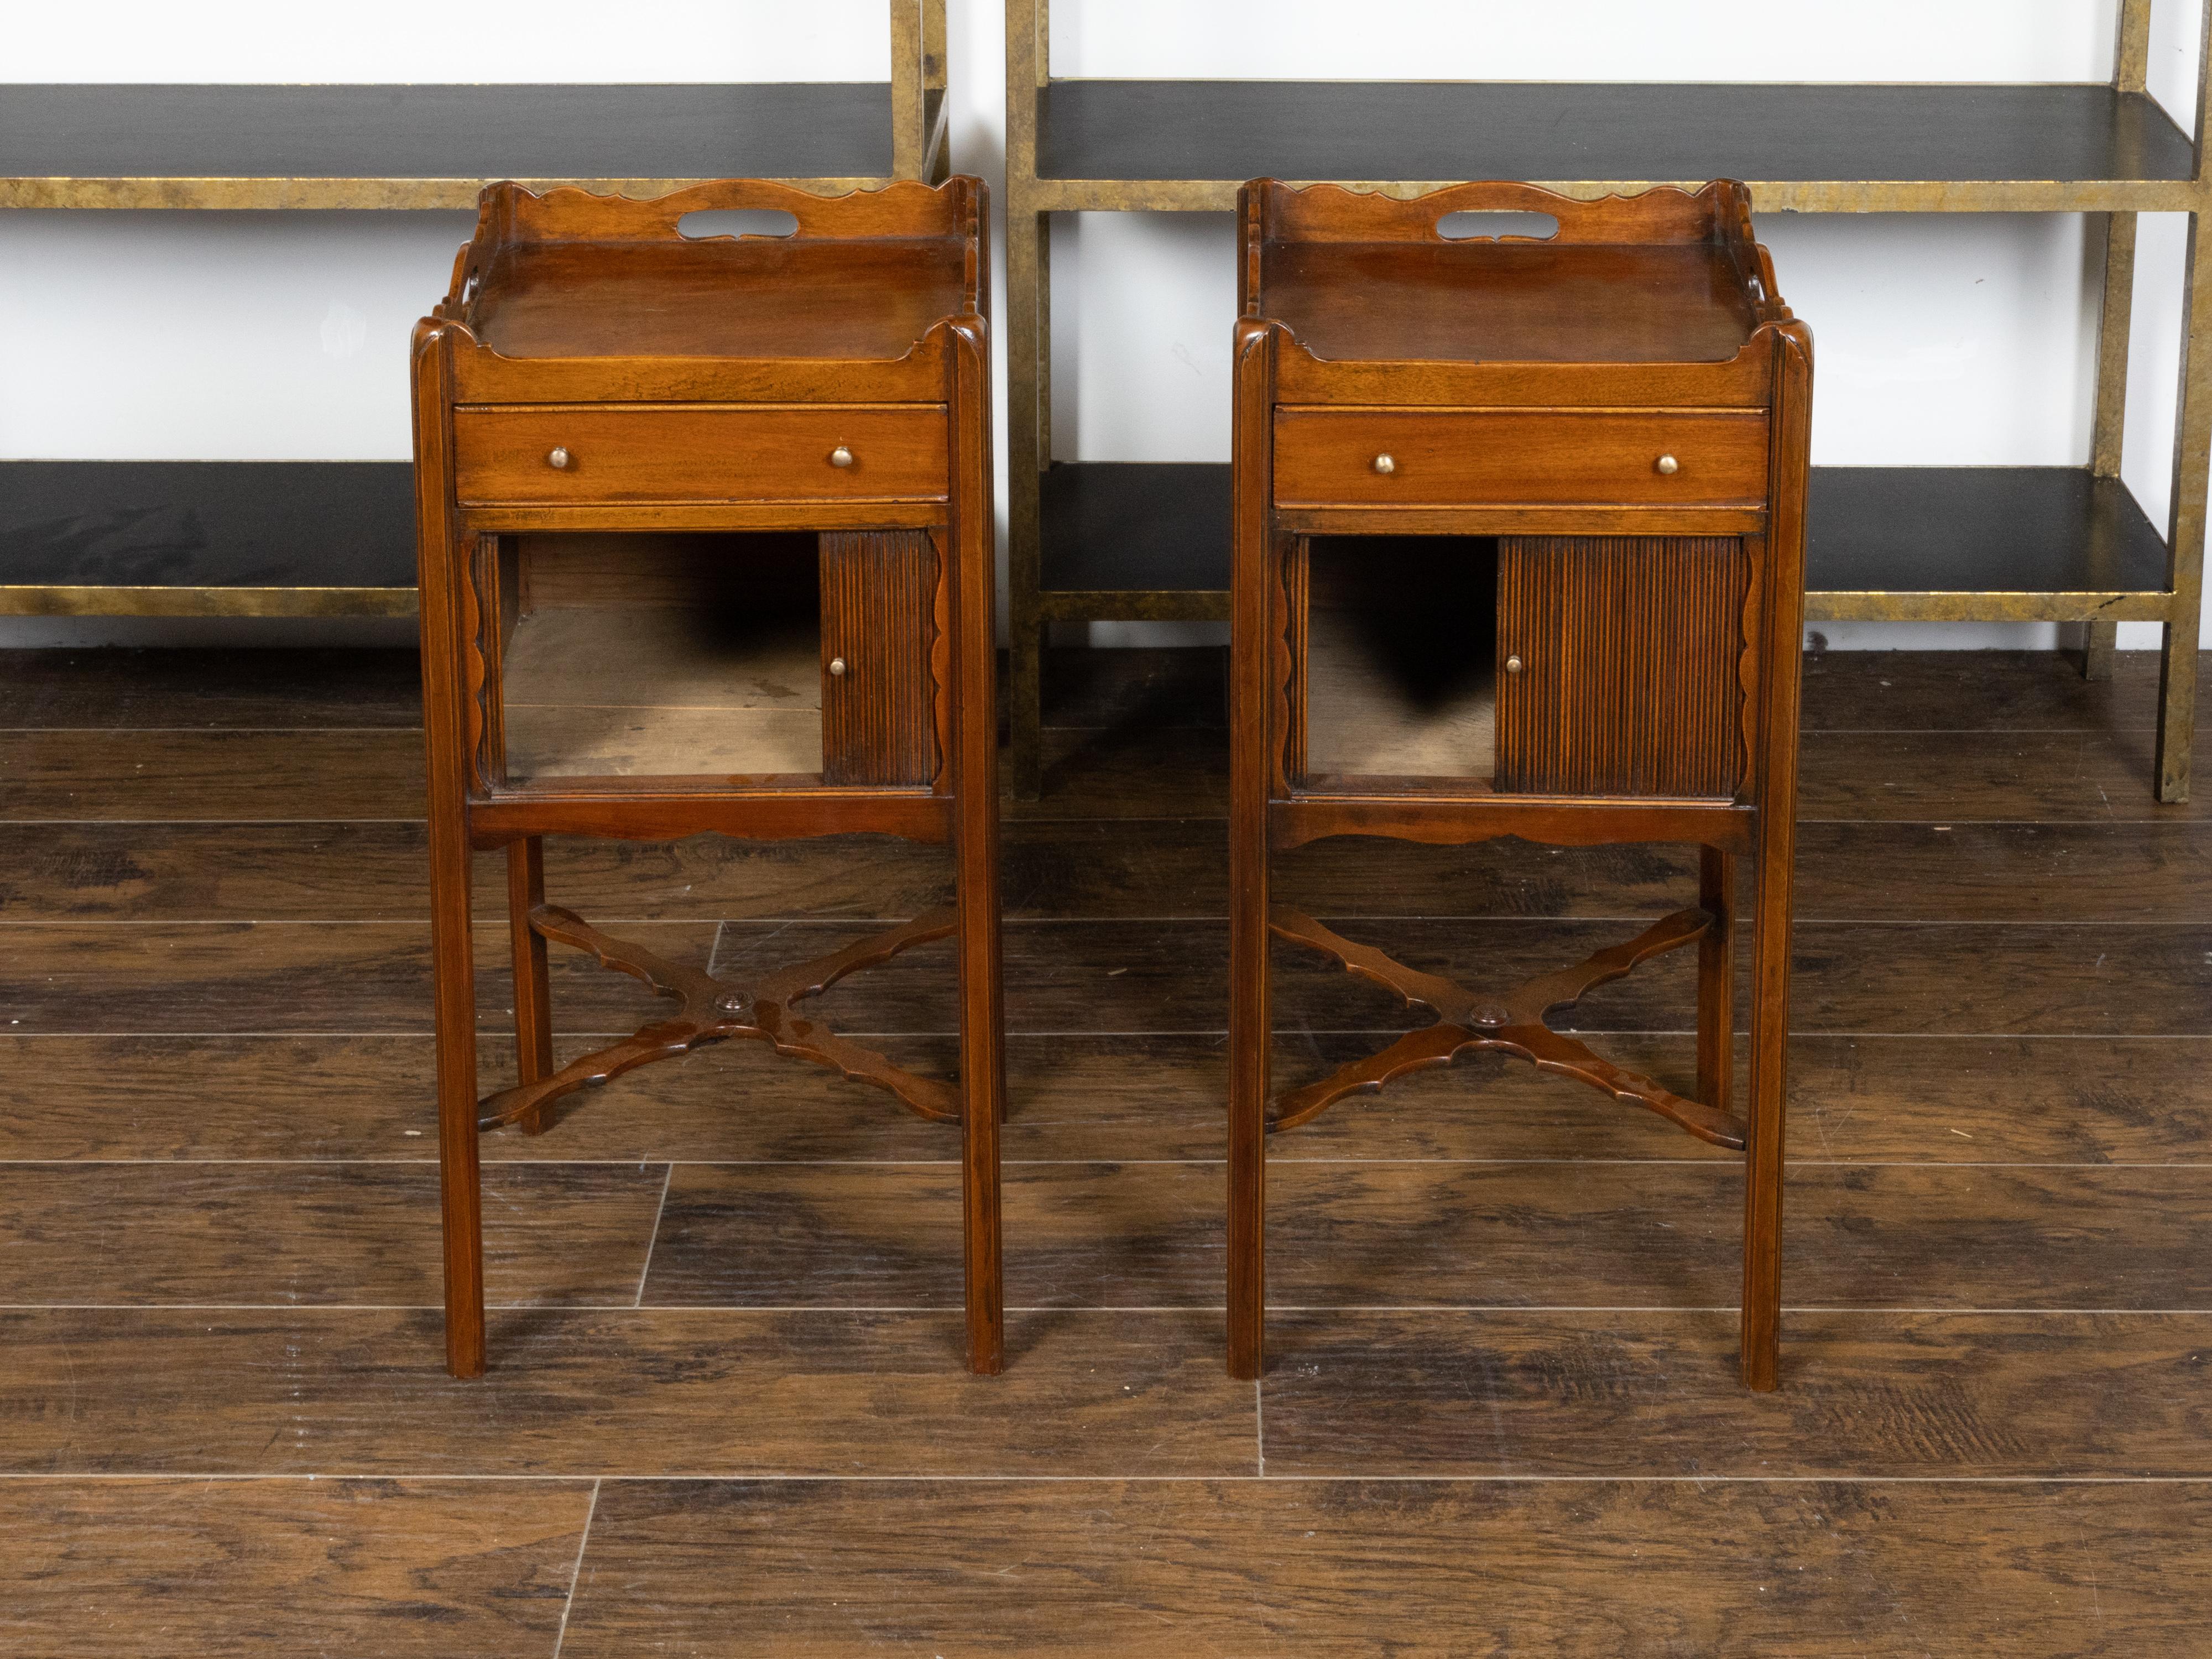 20th Century Pair of English 1900s Mahogany Bedside Tables with Drawer and Tambour Door